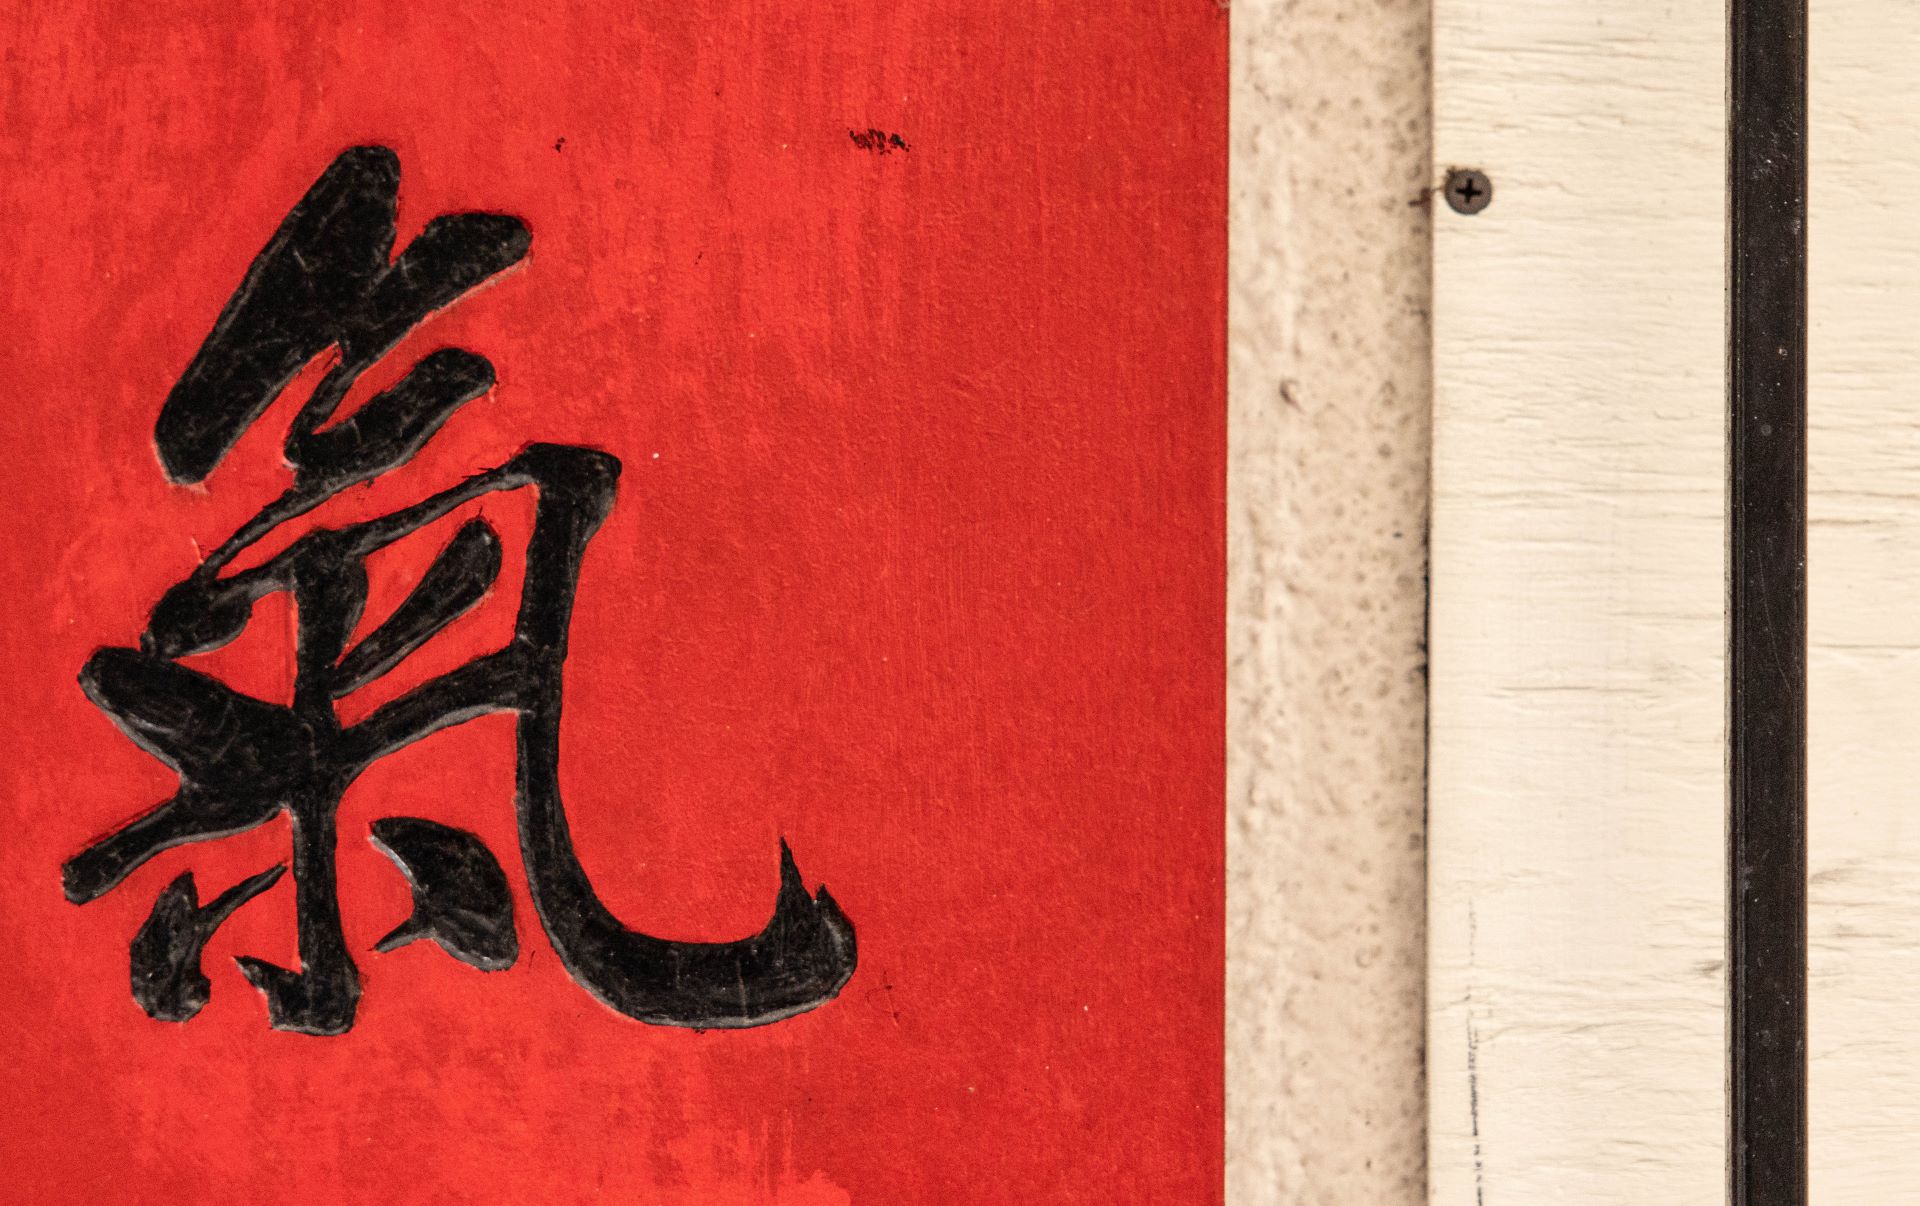 Chinese character Qi in black ink on red background, in Chinatown San Francisco